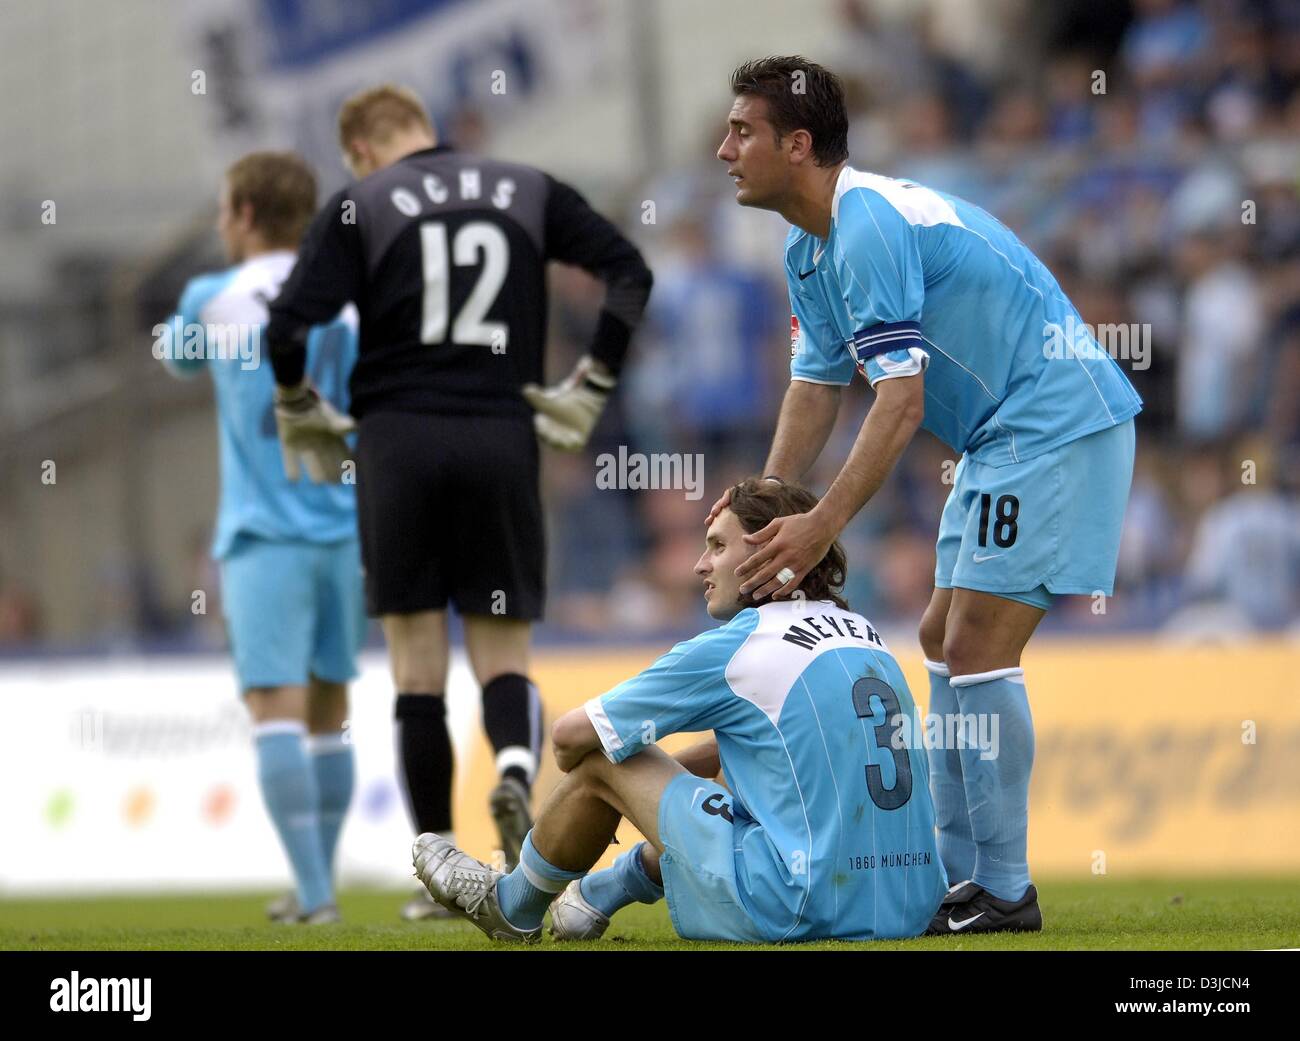 (dpa) - Players Daniel Baier, Timo Ochs, Remo Mayer and Paul Agostino (L-R) of soccer club TSV 1860 Munich look extremely depressed after their 3-4 defeat against LR Ahlen in the Second Bundesliga match at the Gruenwalder stadium in Munich, Germany, 22 May 2005. Munich failed to qualify for Germany's top soccer division. Stock Photo